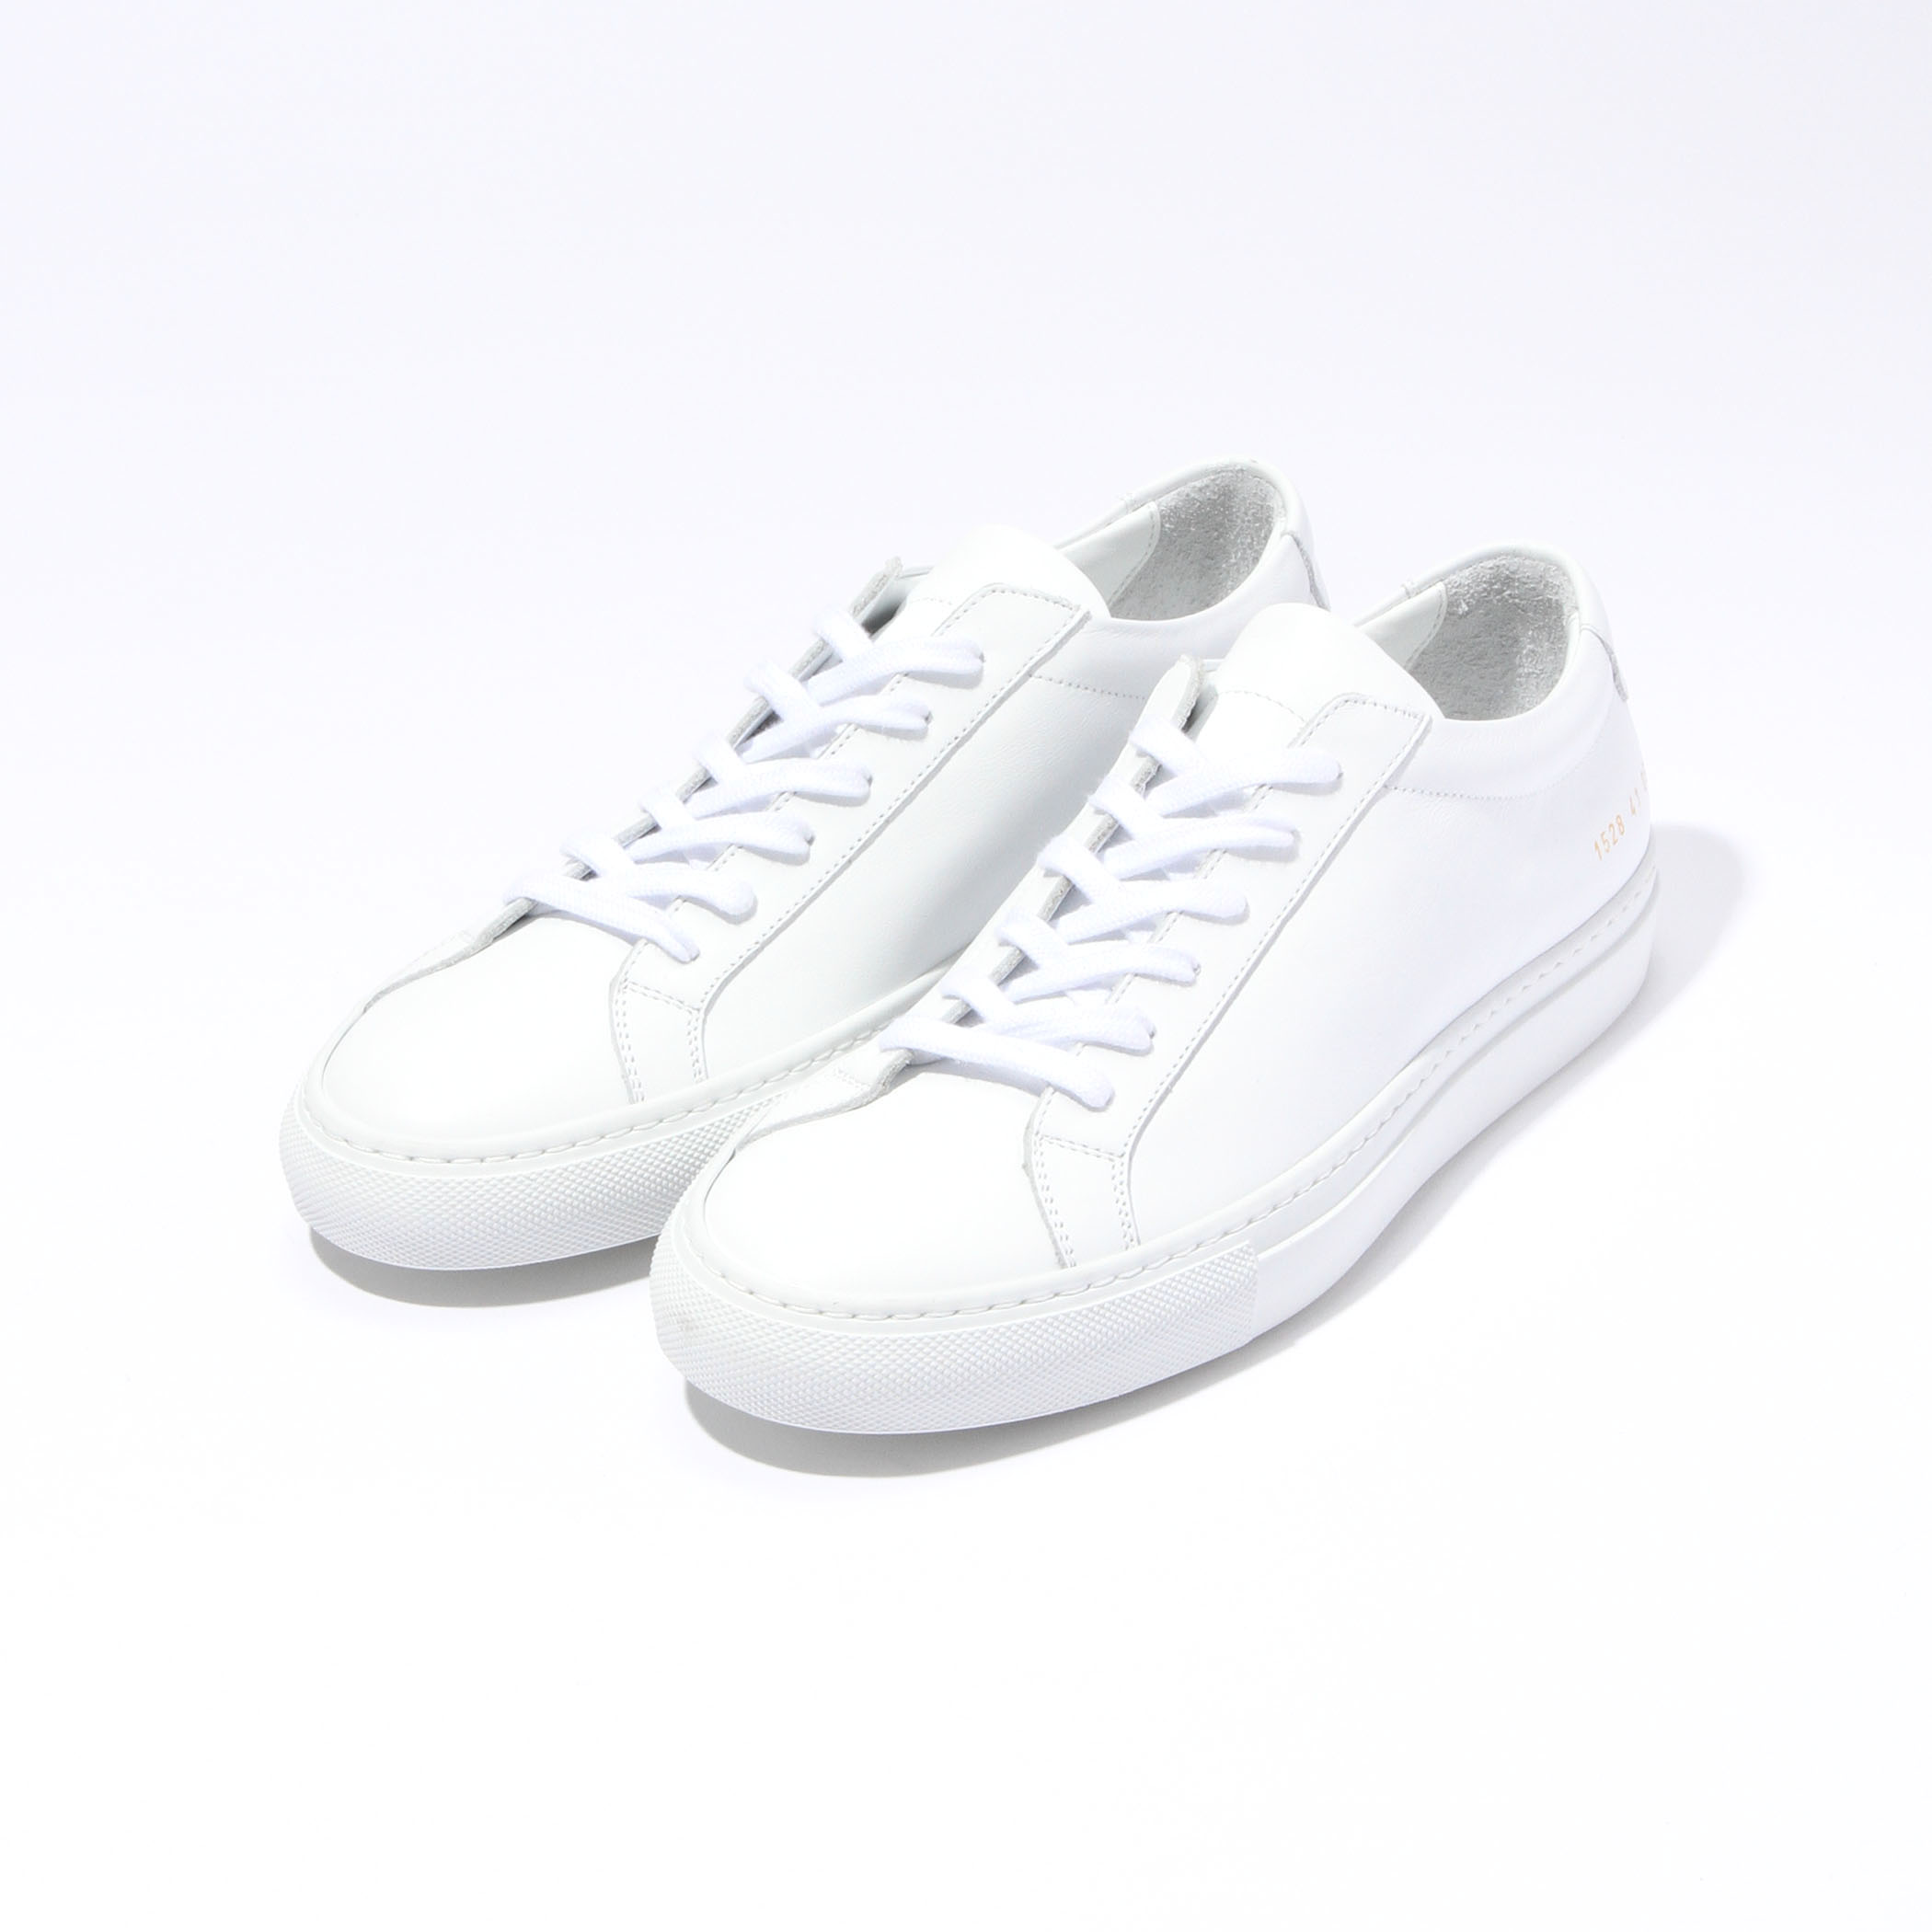 COMMON PROJECTS Achilles Low スニーカー WHITE着用回数は5回程度